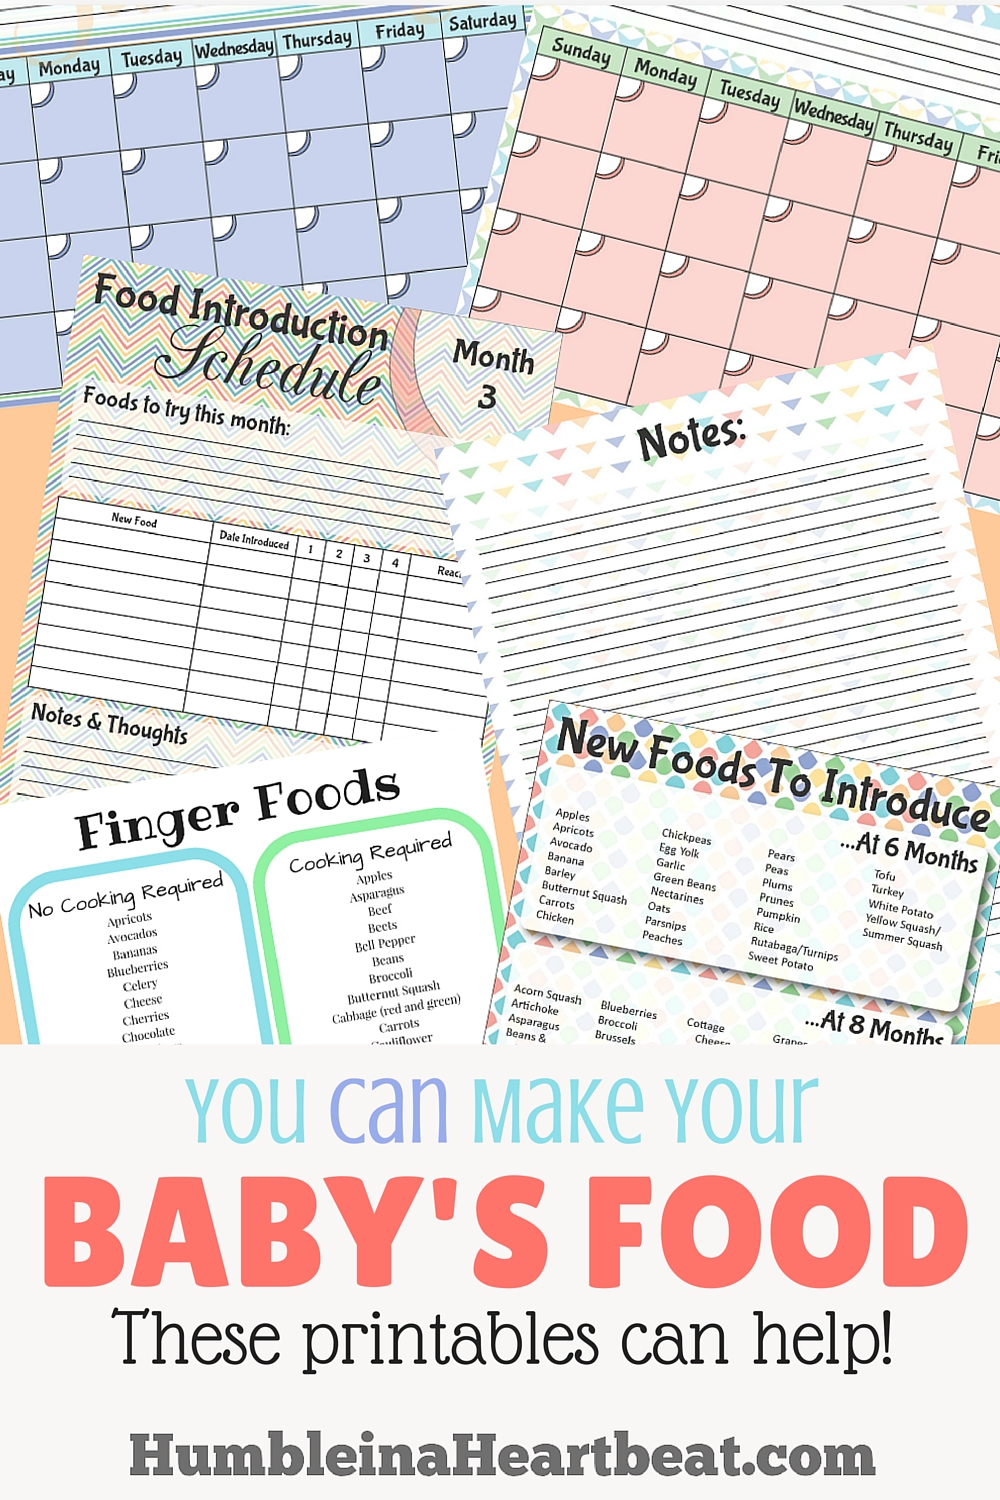 Too busy to make your baby's food at home? These printables can help! It's really not rocket science to feed your baby!